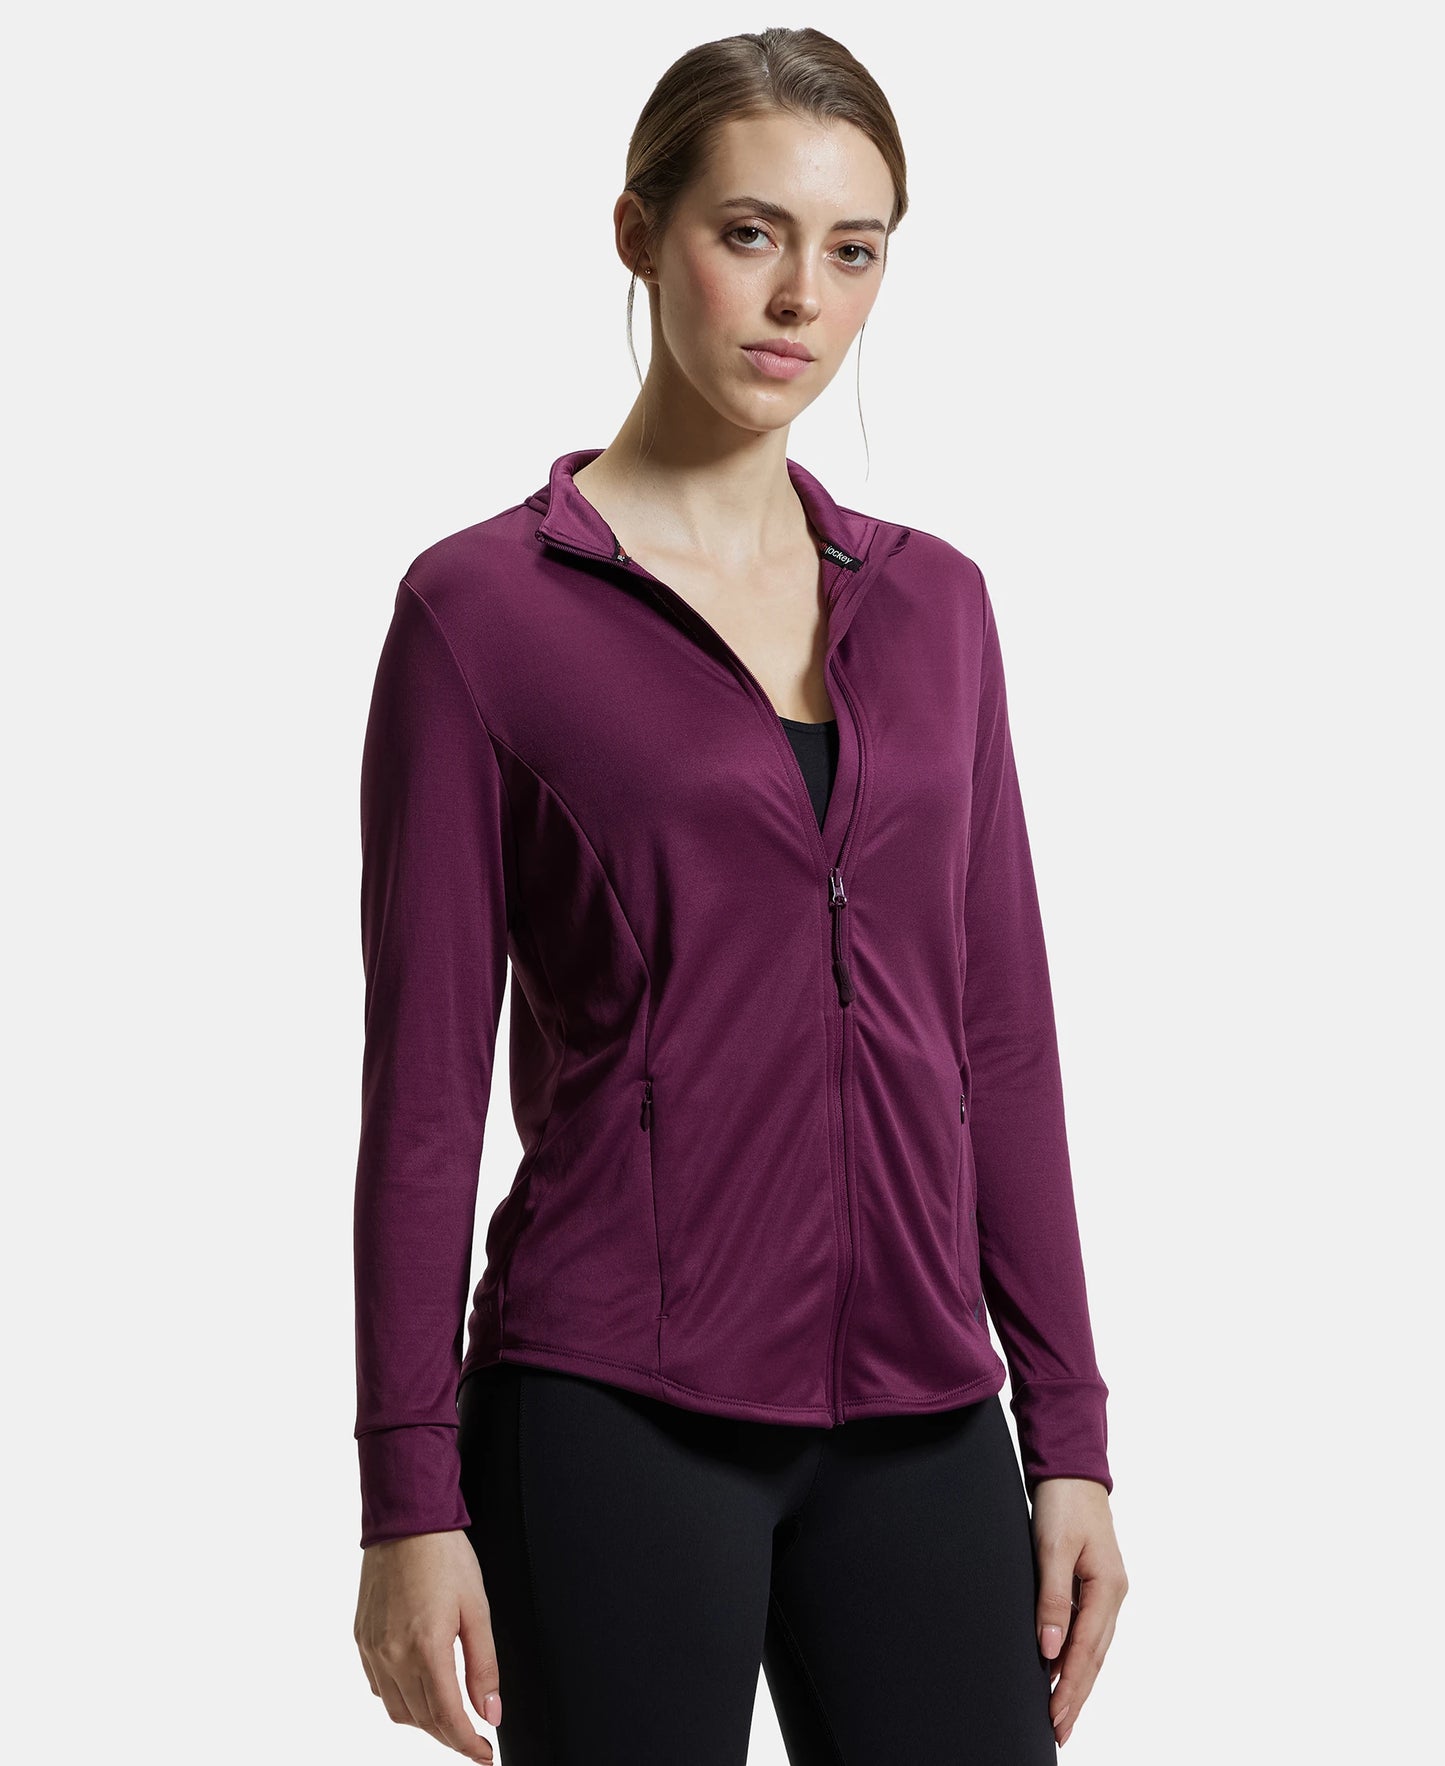 Microfiber Relaxed fit Jacket with Curved Back Hem and StayDry Treatment - Grape Wine-2